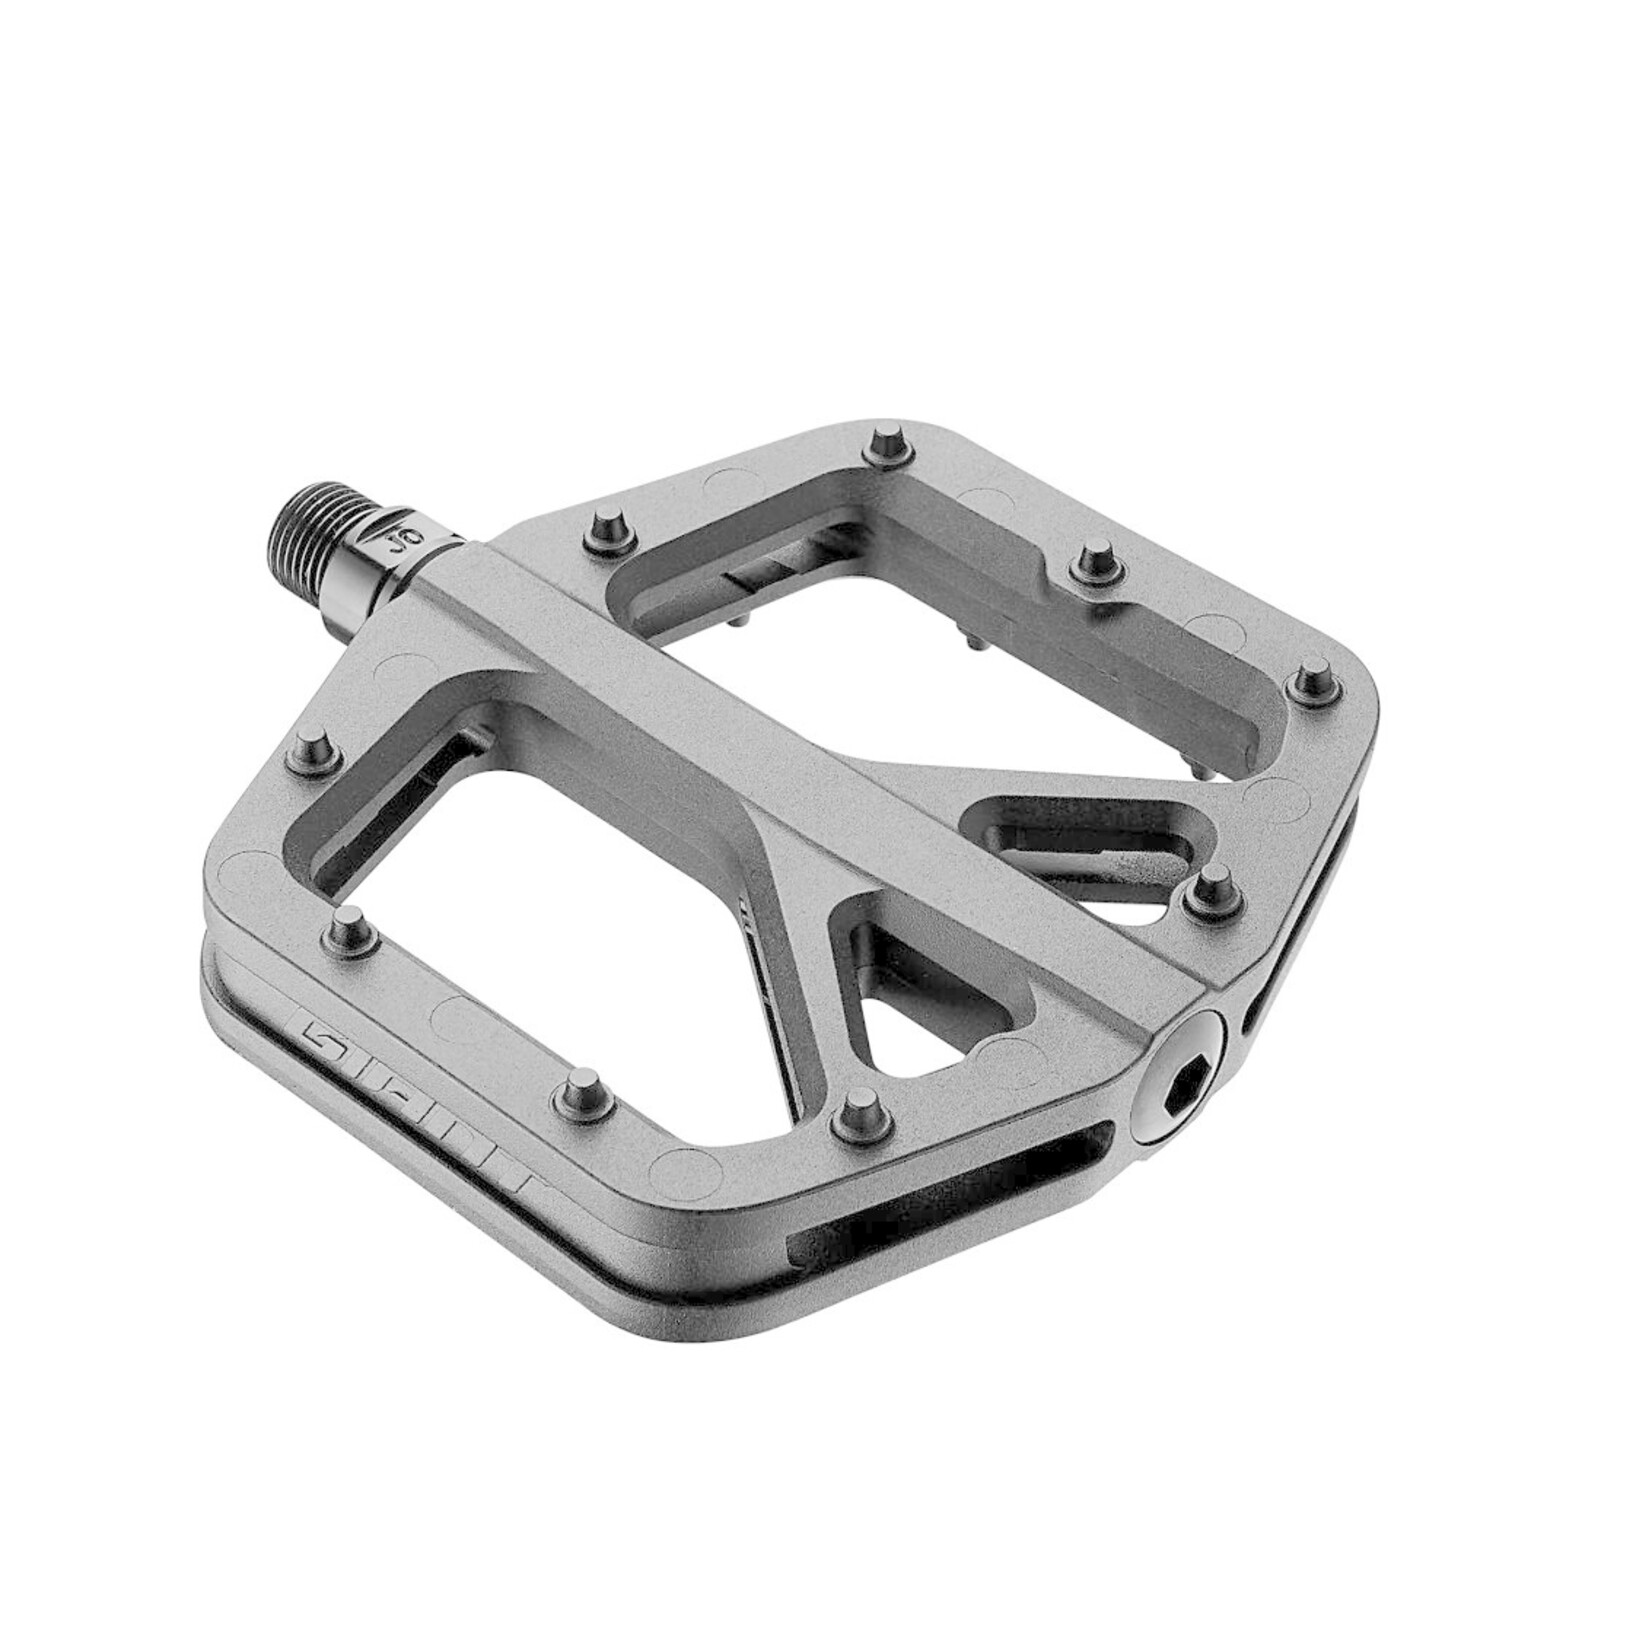 GIANT Pinner Comp Pedals